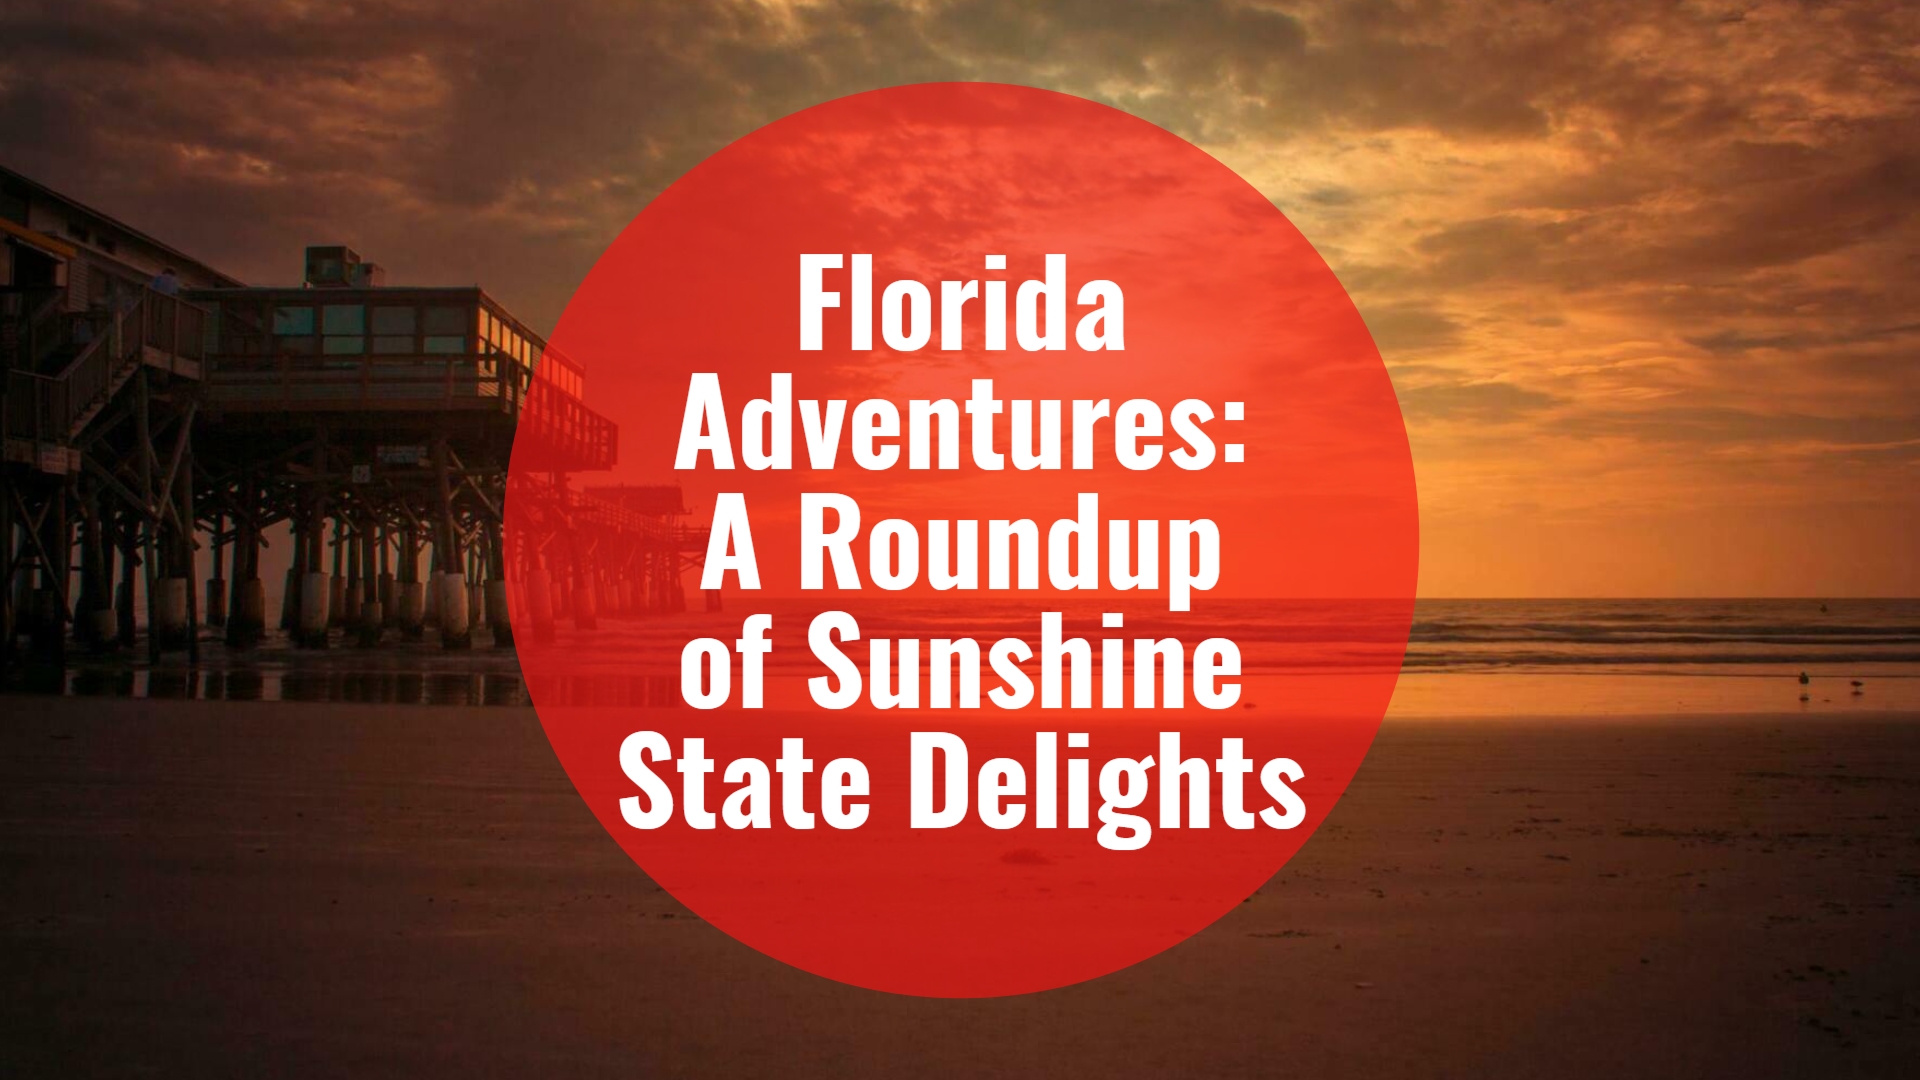 Florida Adventures A Roundup of Sunshine State Delights